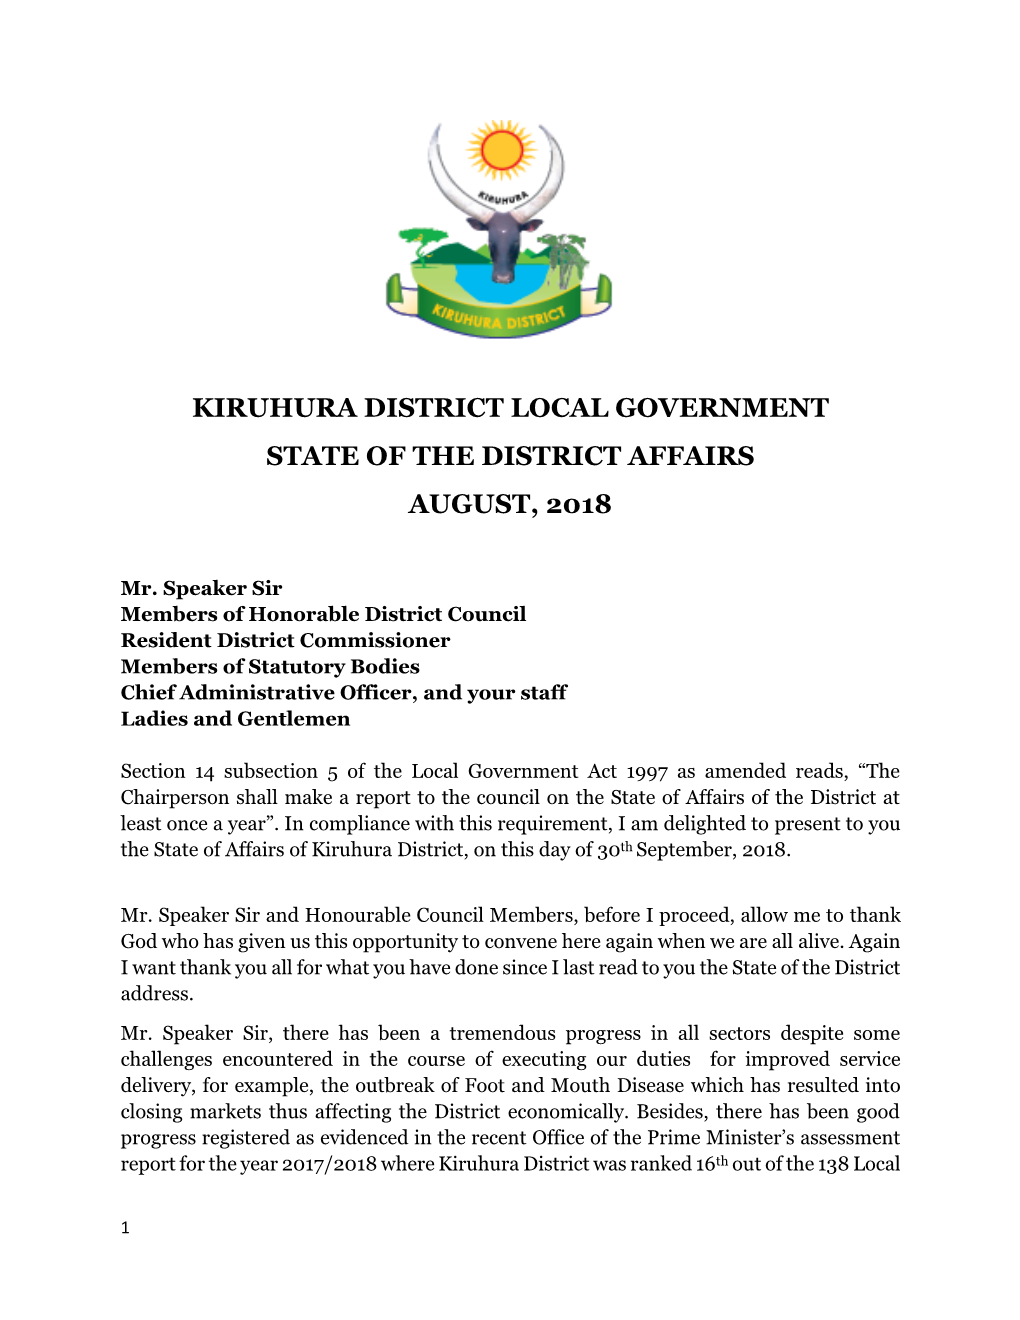 Kiruhura District Local Government State of the District Affairs August, 2018